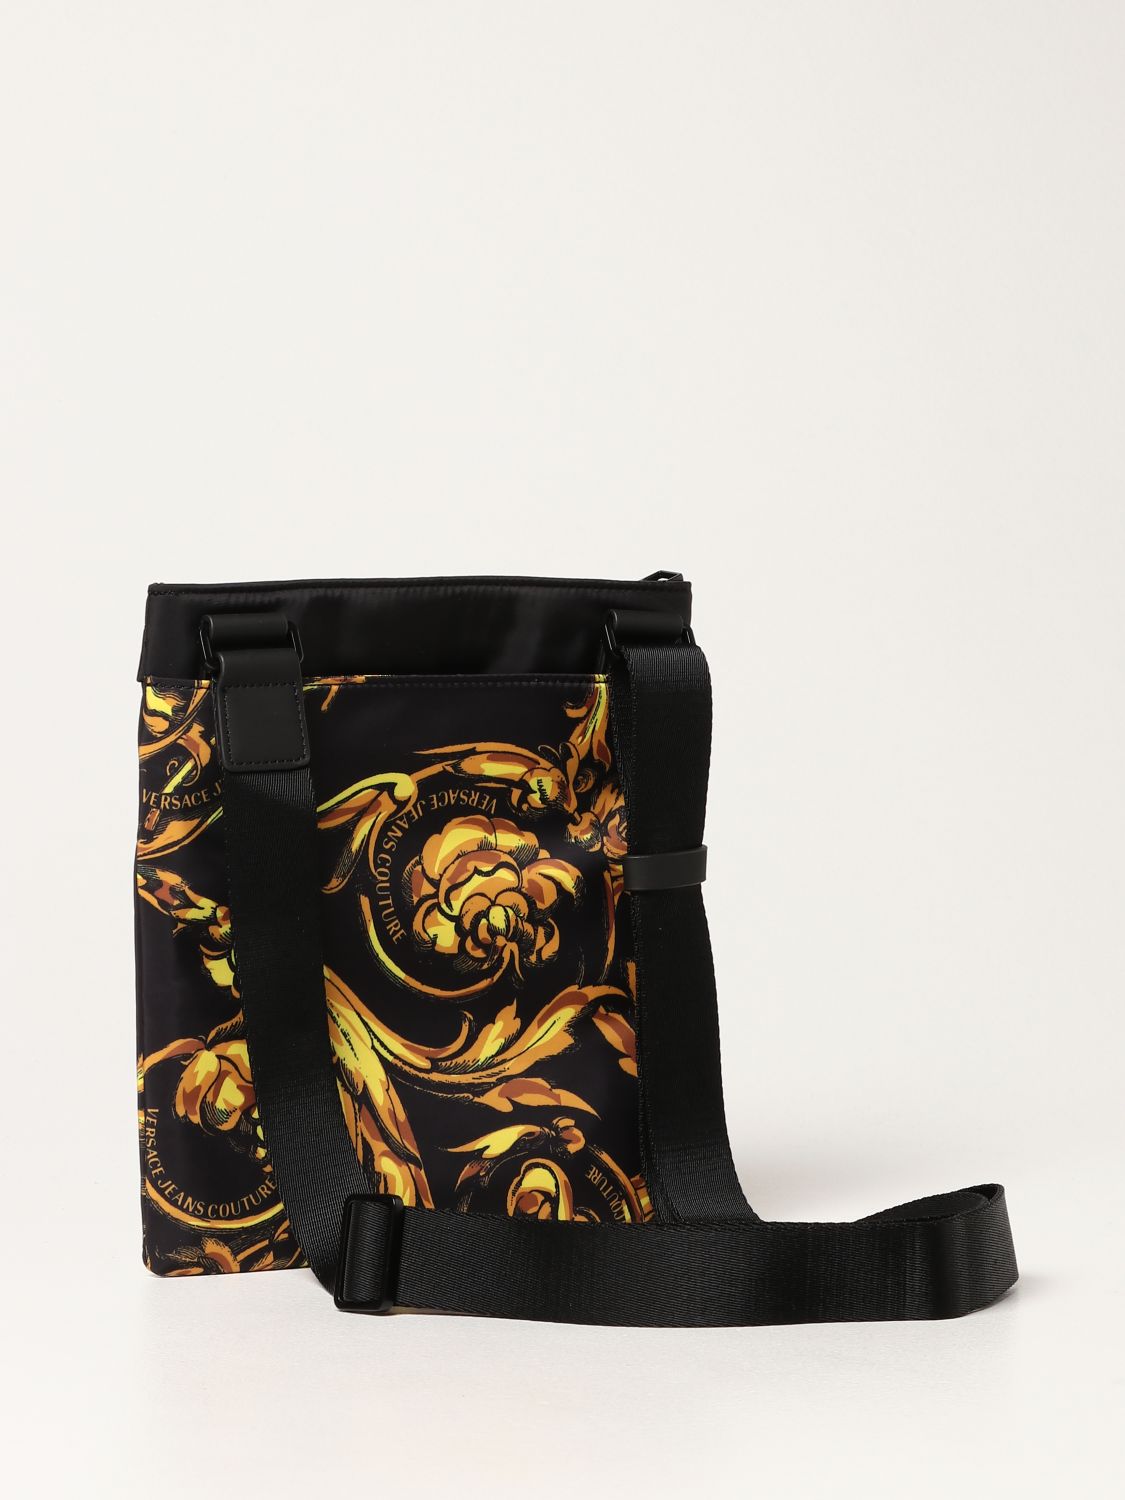 Versace Jeans Couture bag in Baroque nylon